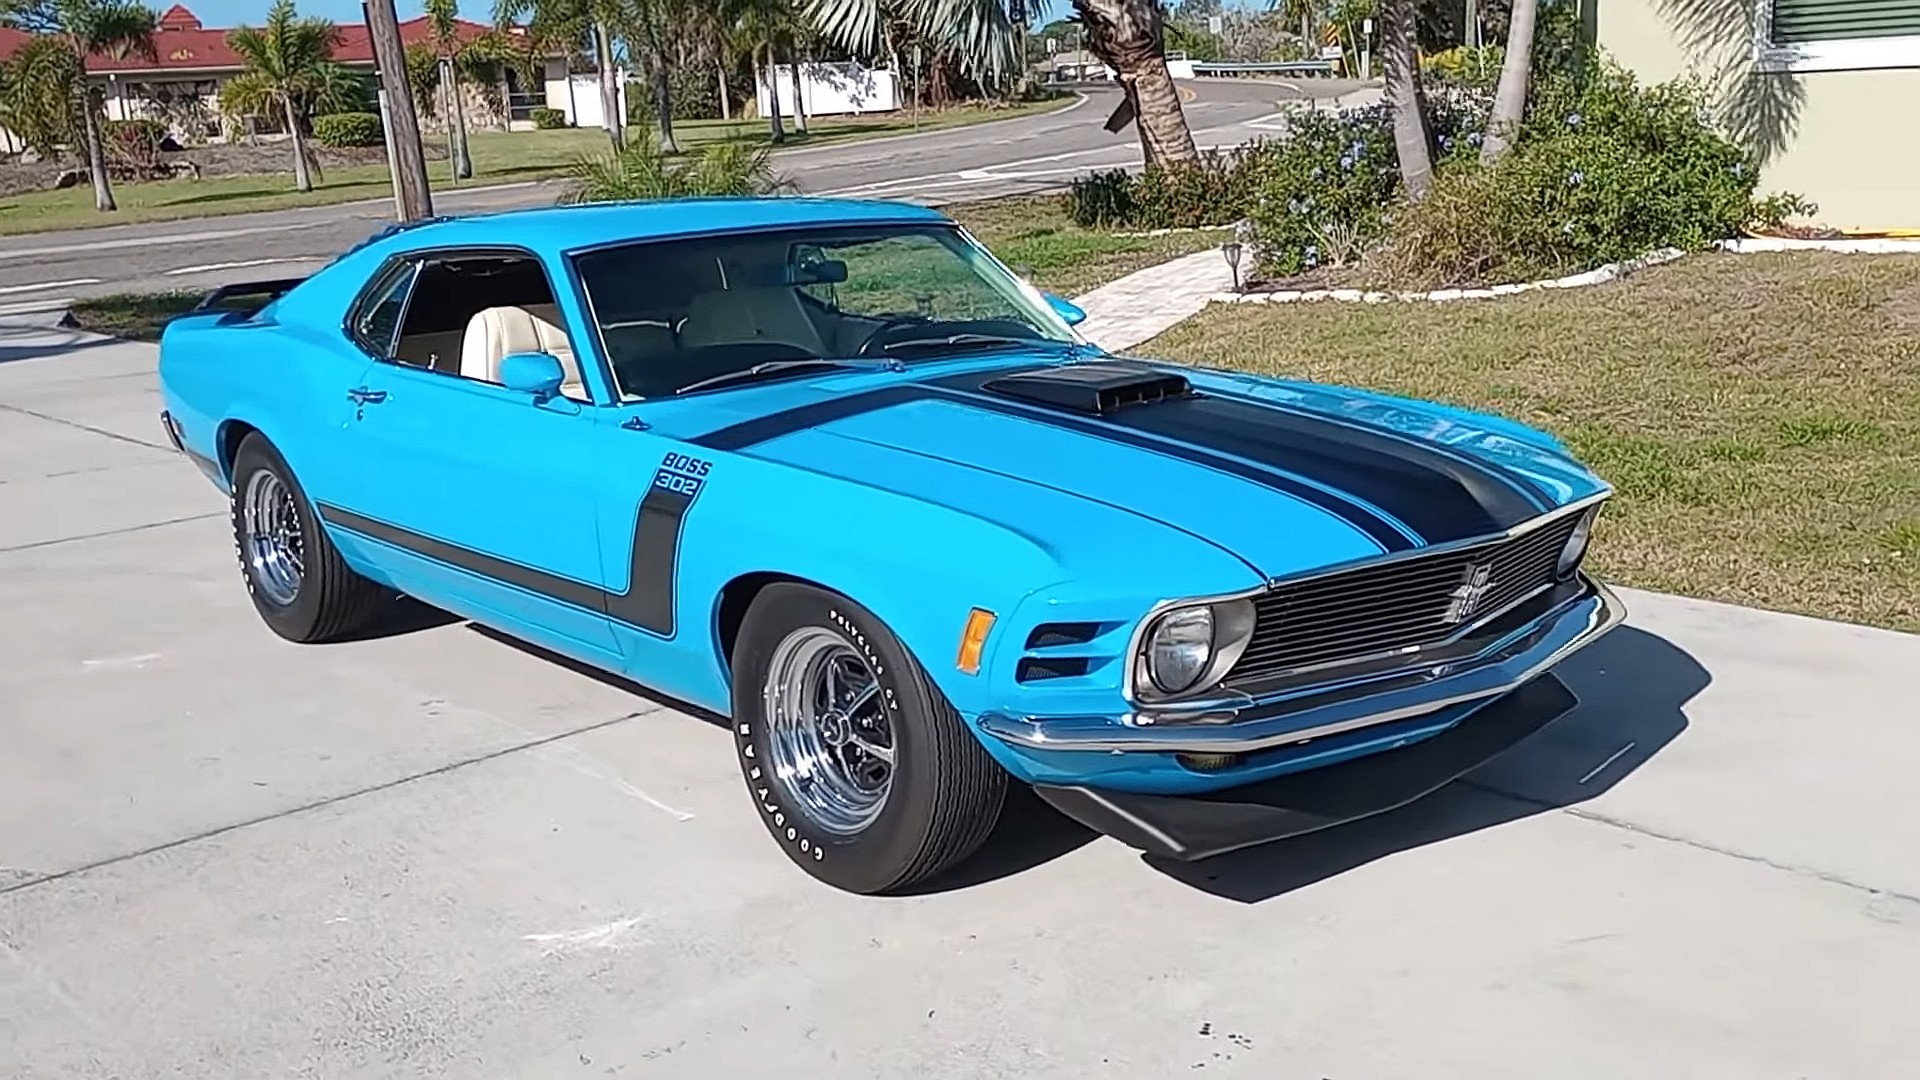 1970 Ford Mustang Boss 302 Is a Restored Gem With a Very Rare Feature - autoevolution